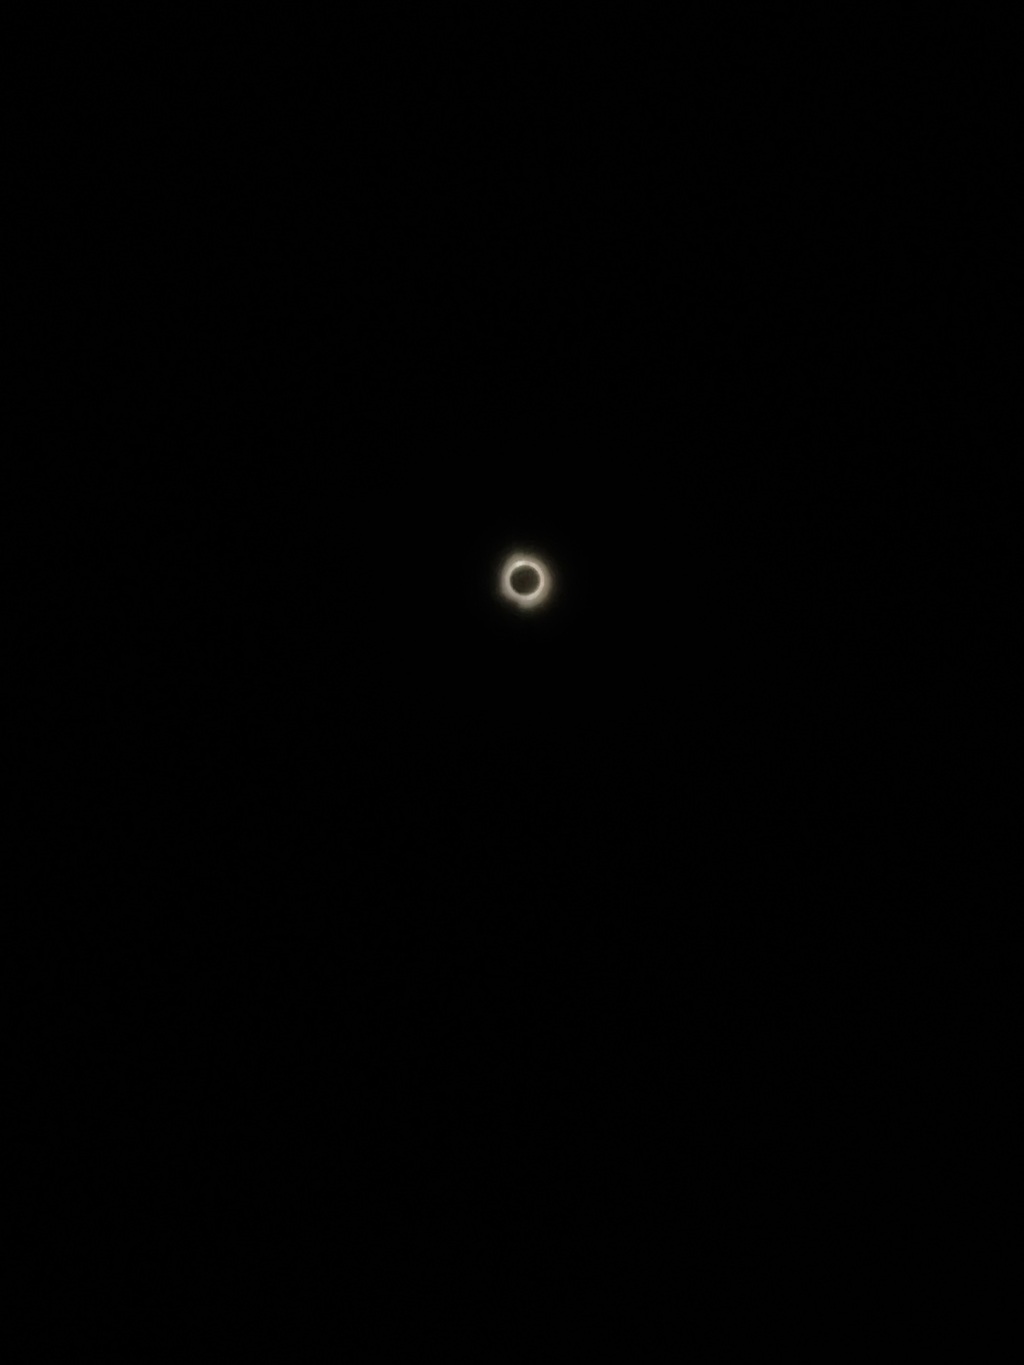 Total solar eclipse in Canada( カナダでの皆既日食）